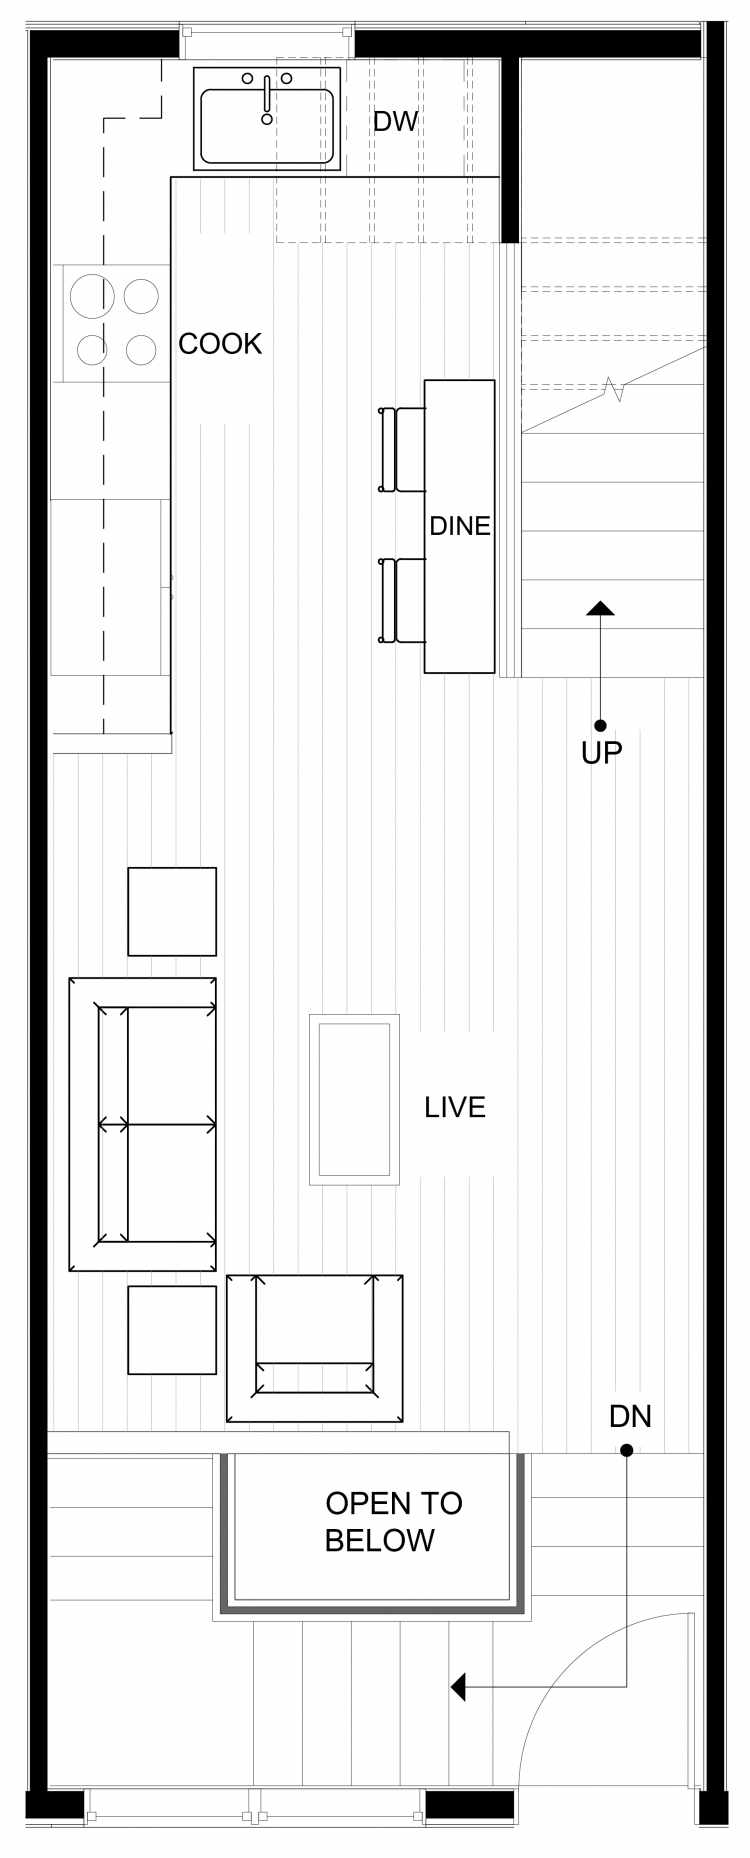 Second Floor Plan of 1540 15th Ave E, One of the Larrabee Townhomes in Capitol Hill